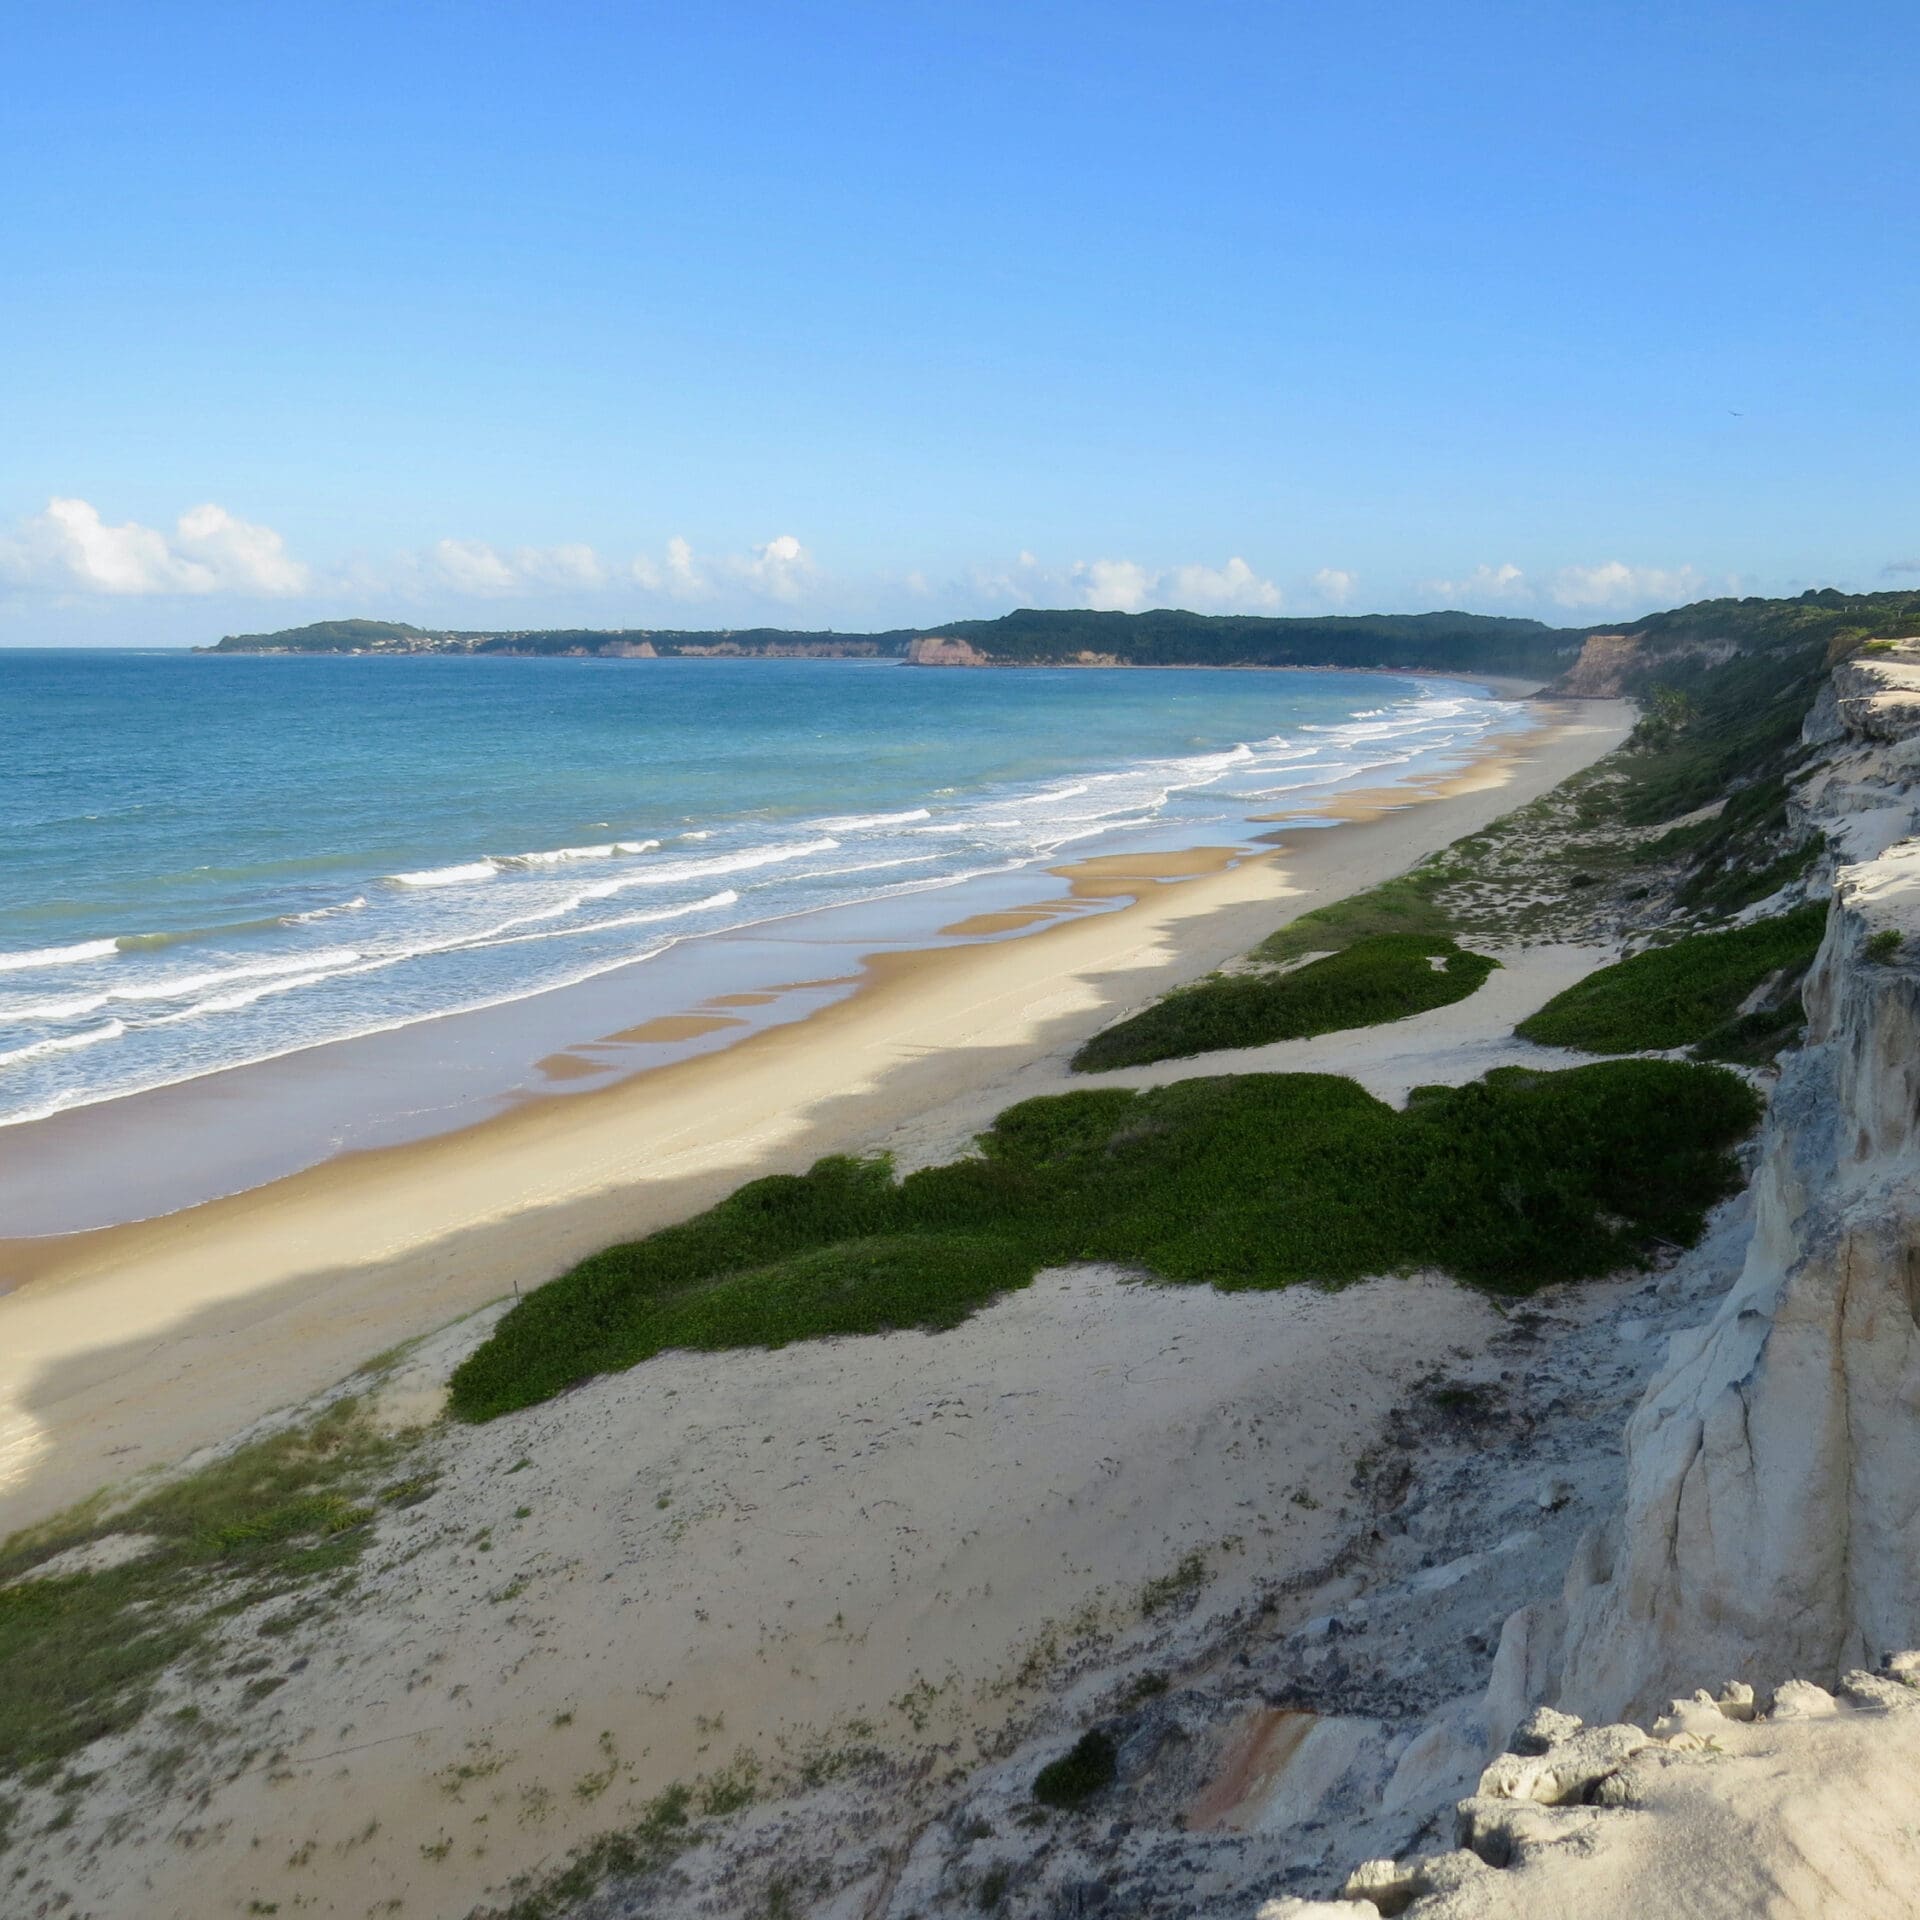 Pipa Beach, Brazil, where NomadX is opening a new digital nomad village to connect remote workers